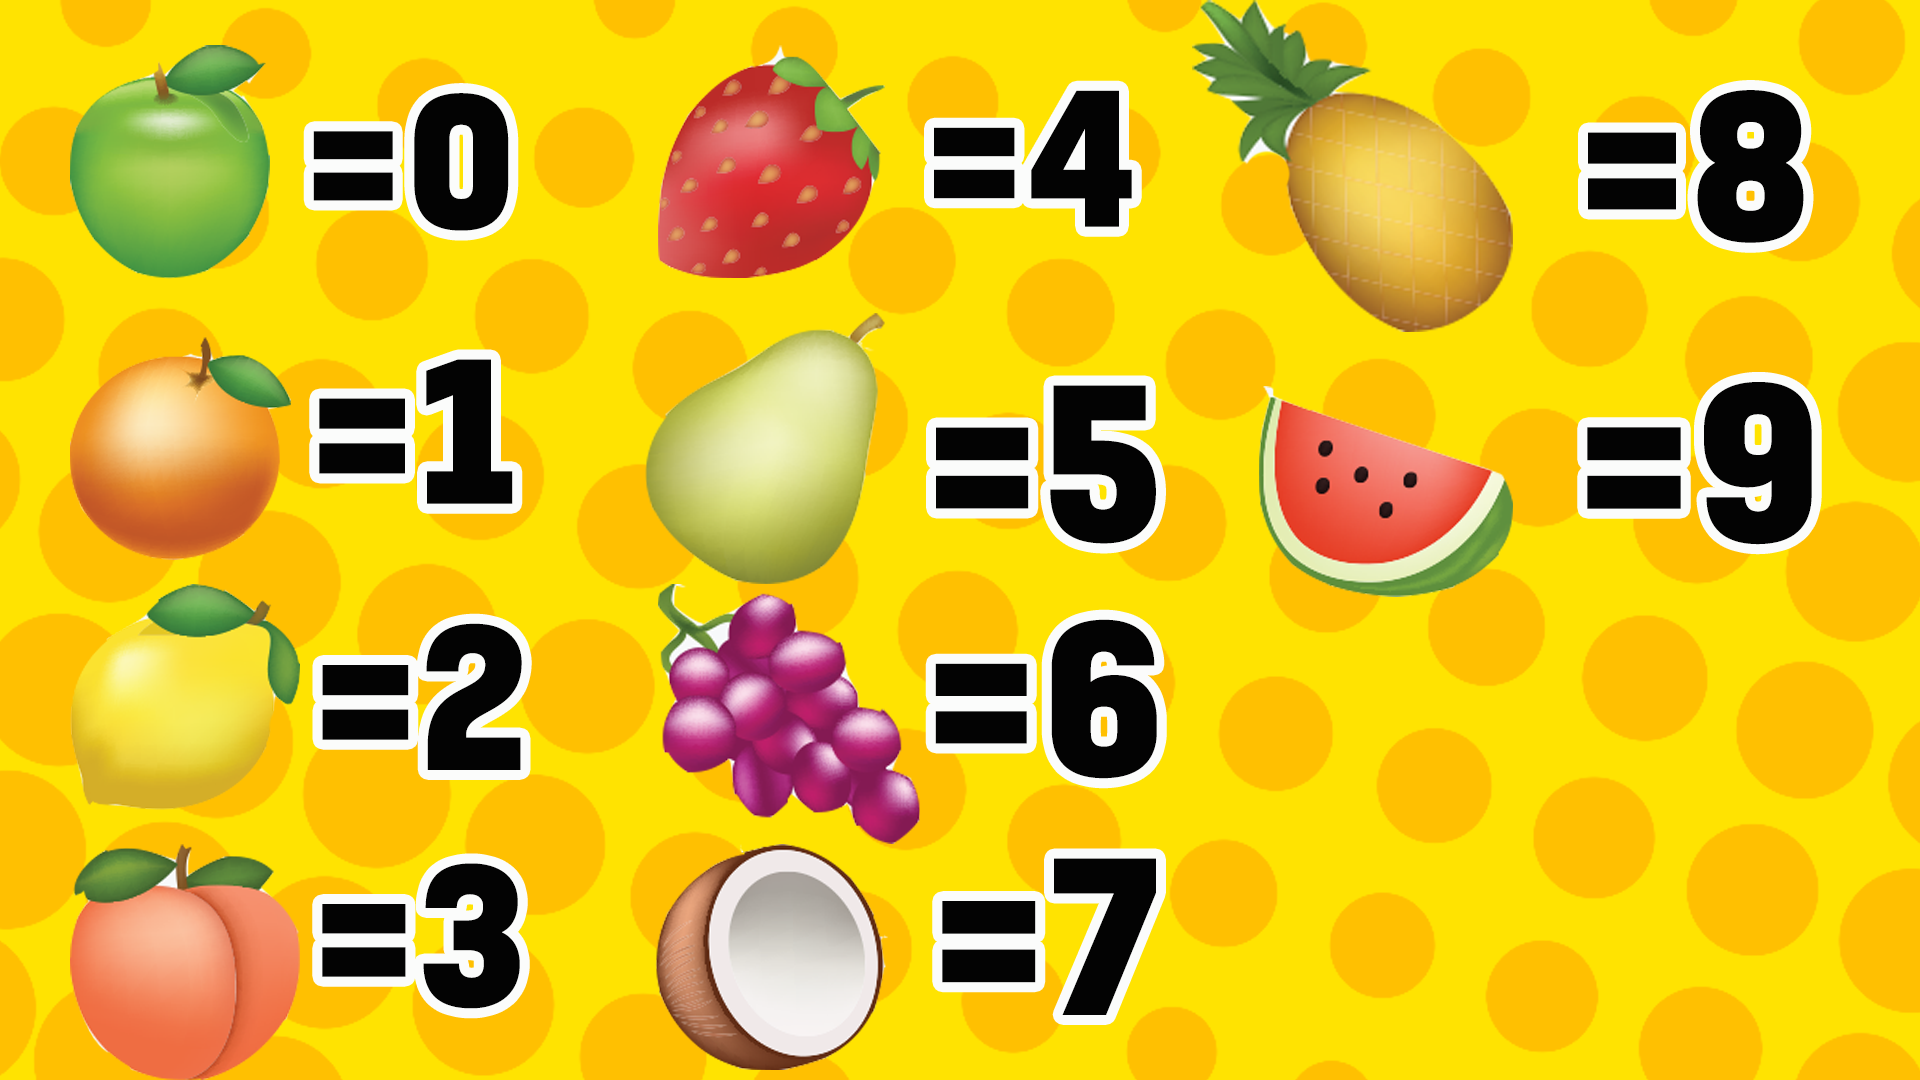 Can you solve the emojis puzzle  Maths puzzles, Picture puzzles, Math  pictures